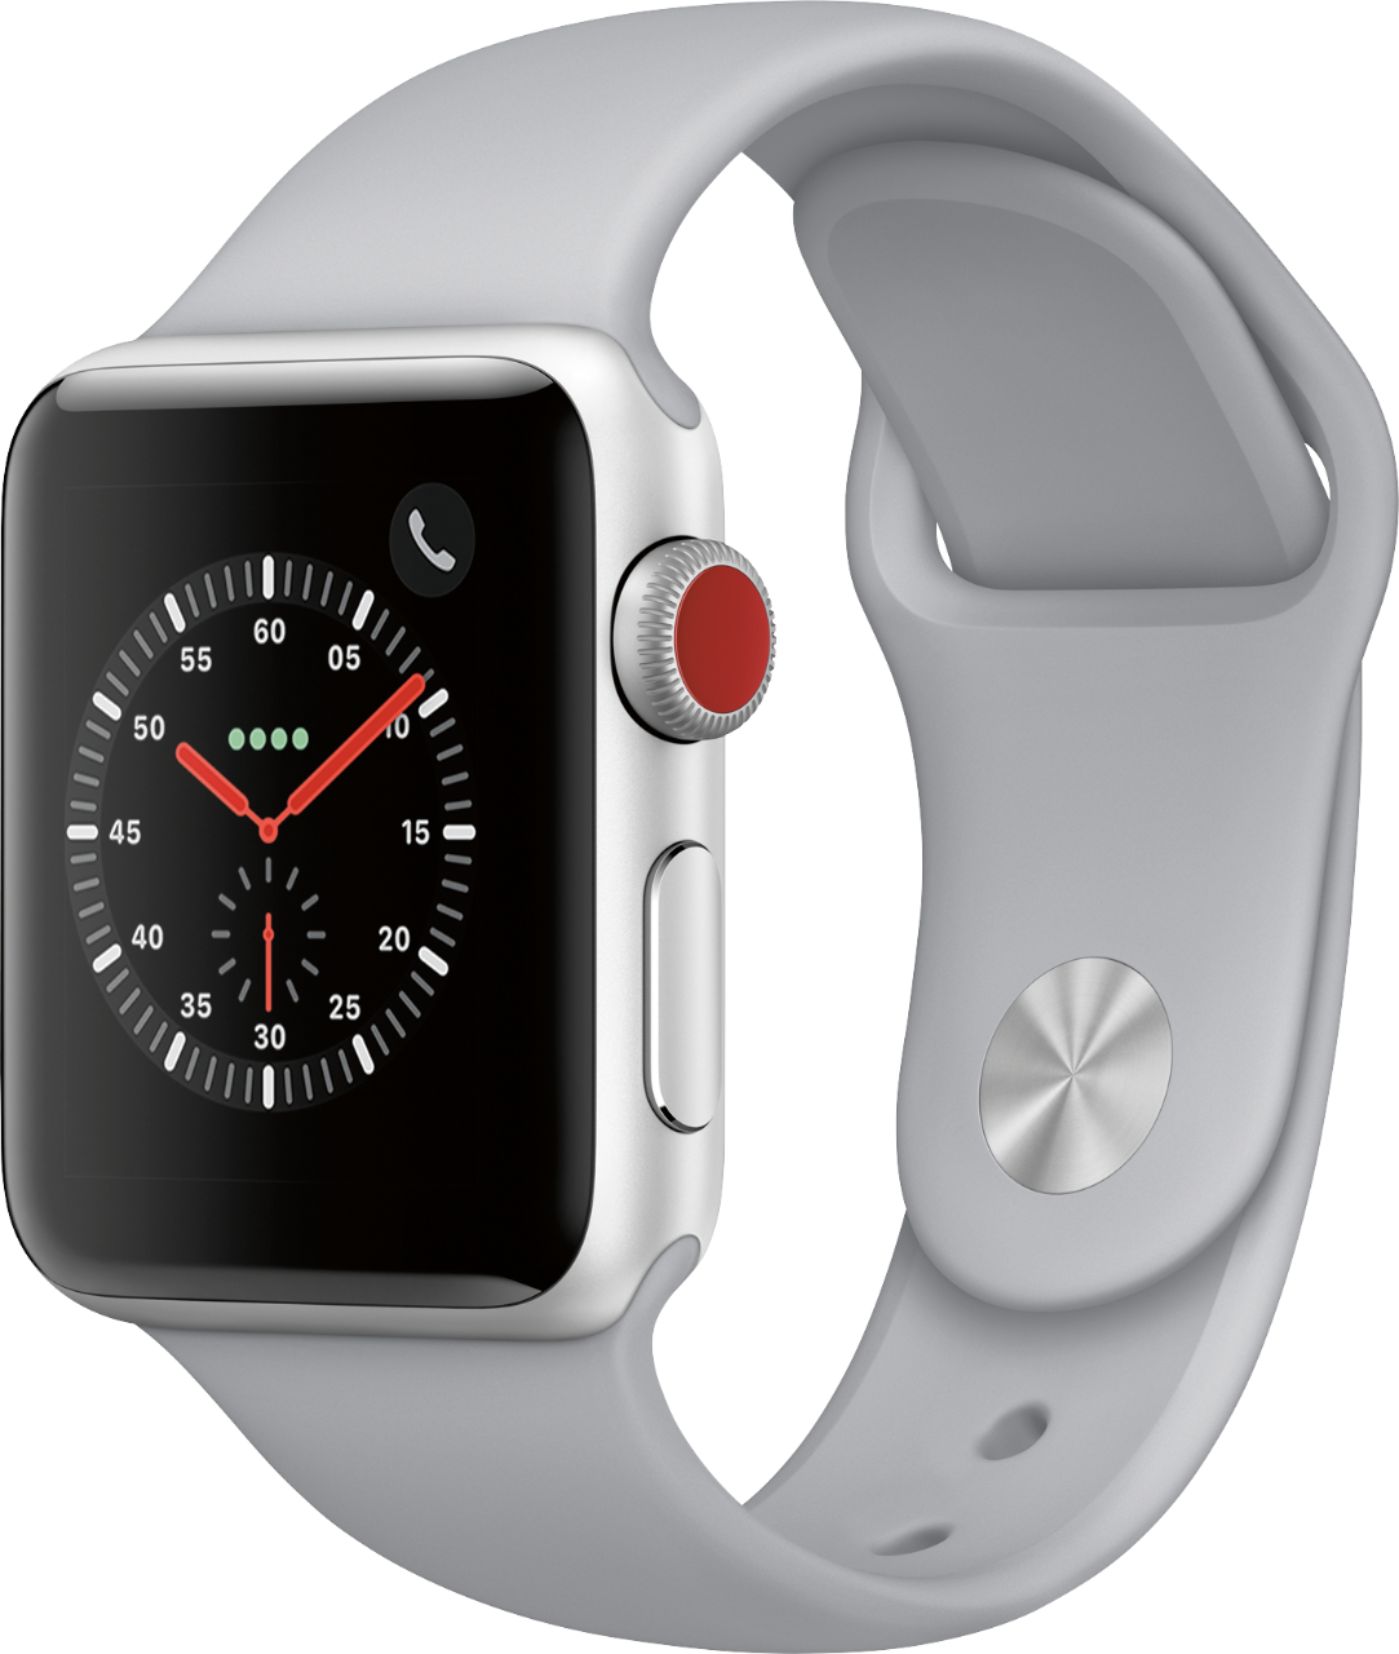 Apple Iwatch Series 3, 38mm Gps Is Available for Sale in Ikeja